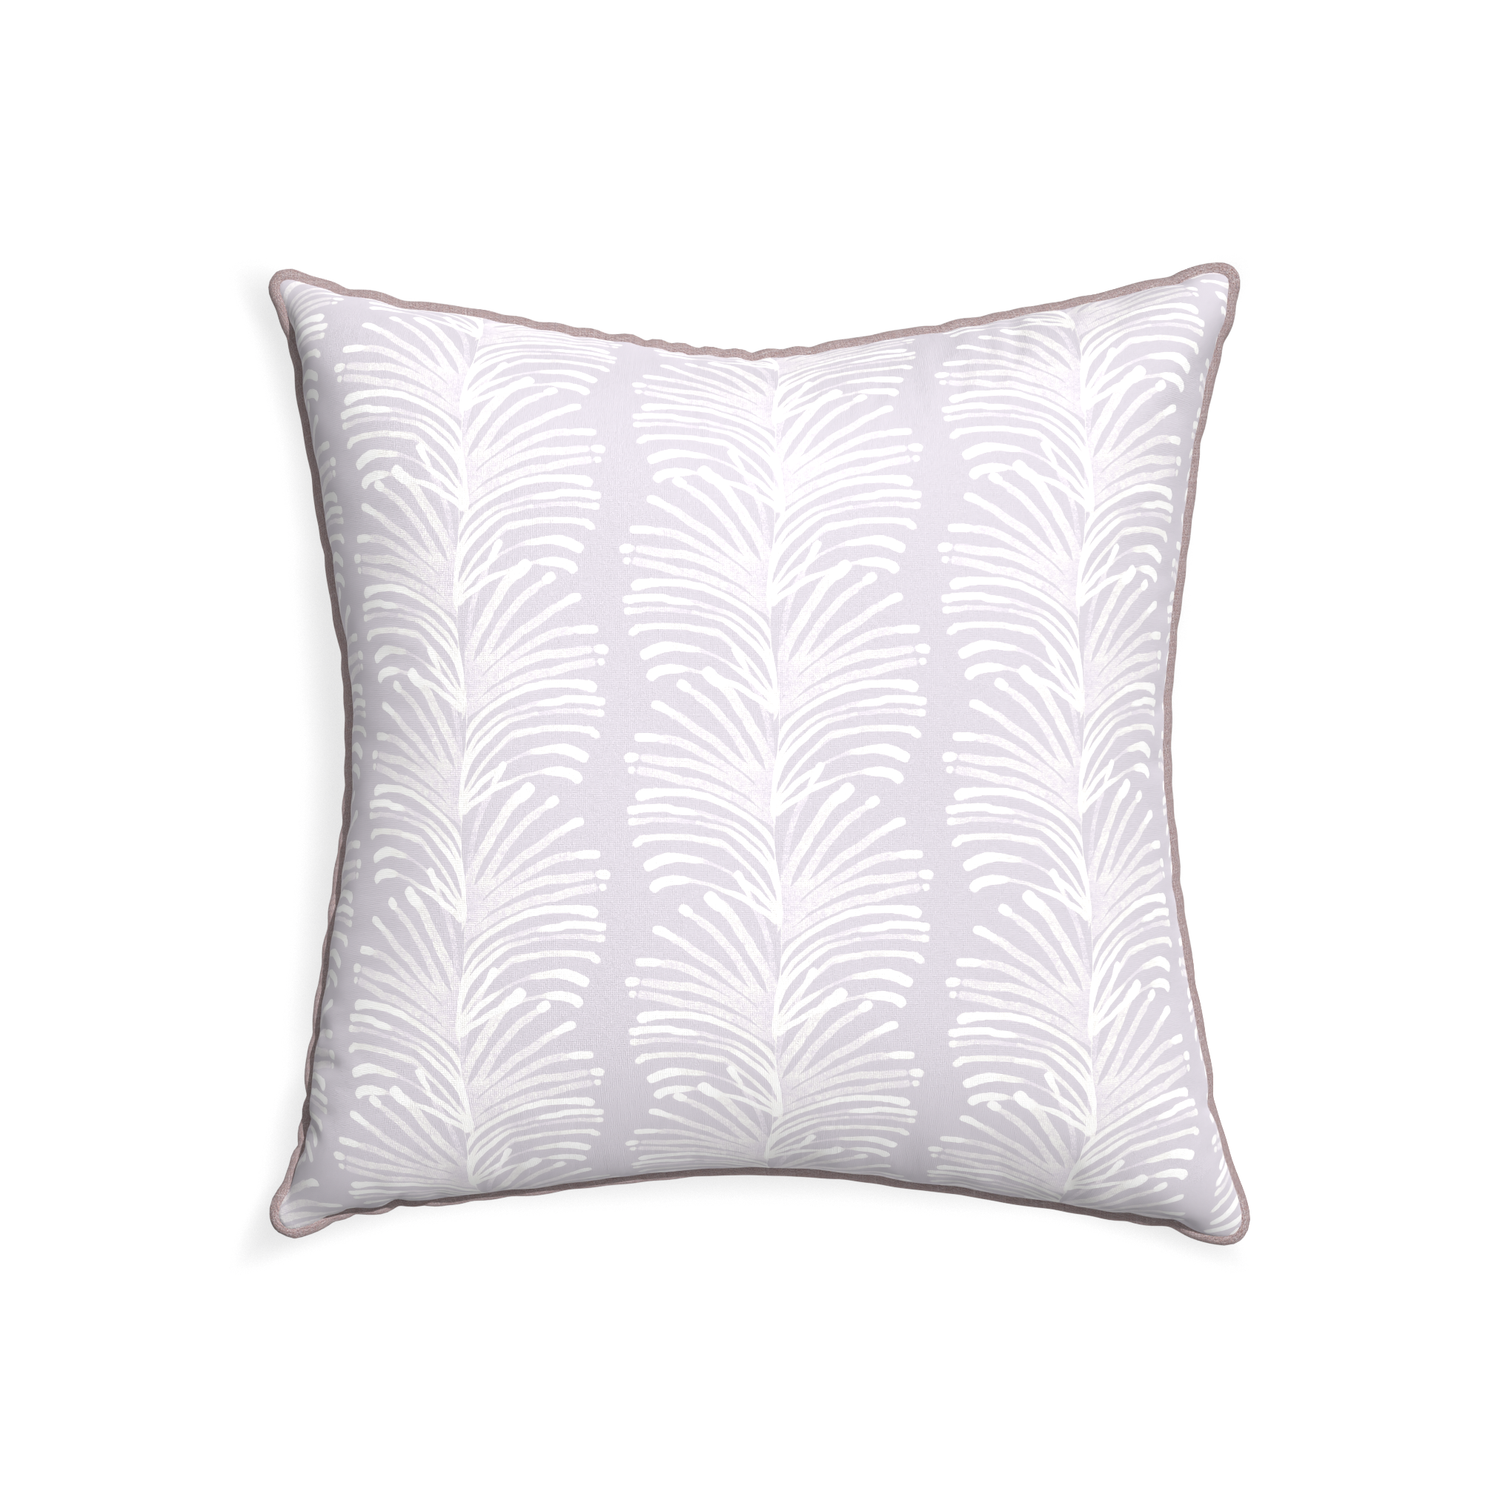 22-square emma lavender custom lavender botanical stripepillow with orchid piping on white background